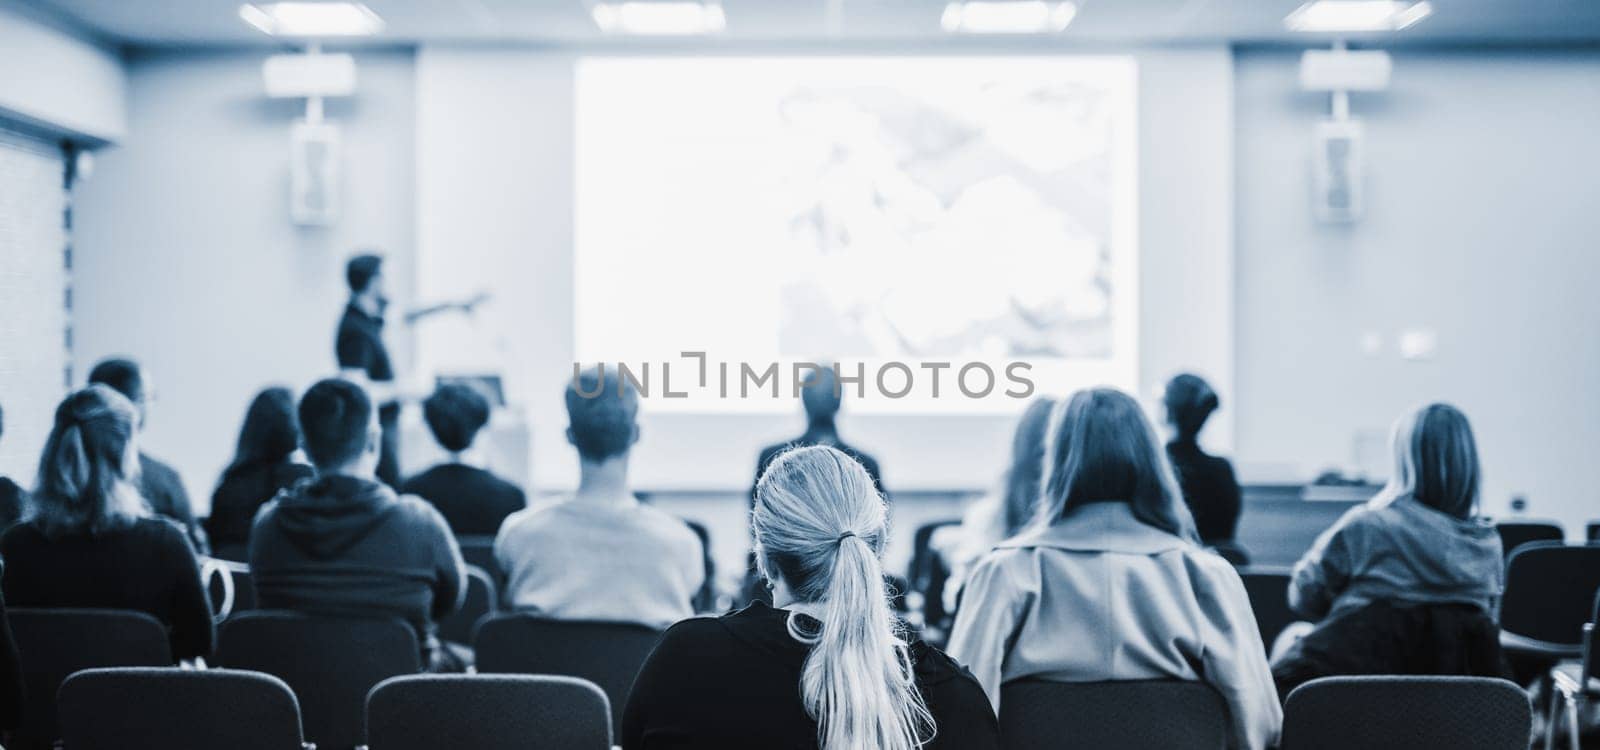 Speaker giving a talk in conference hall at business event. Rear view of unrecognizable people in audience at the conference hall. Business and entrepreneurship concept. Blue tones black and white